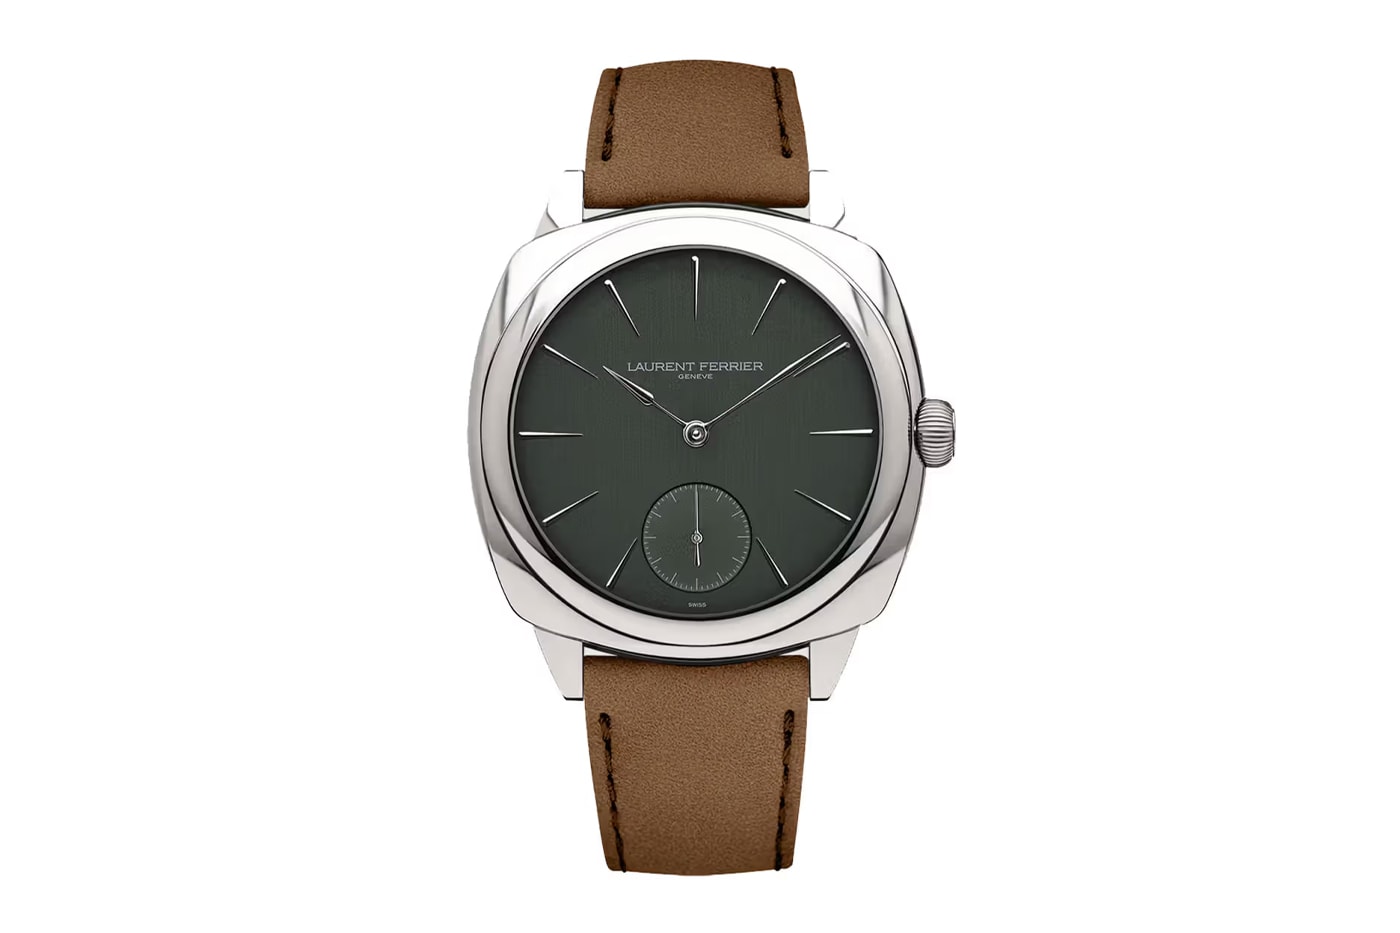 Laurent Ferrier Casts Its Micro-Rotor in “Evergreen” Watches 